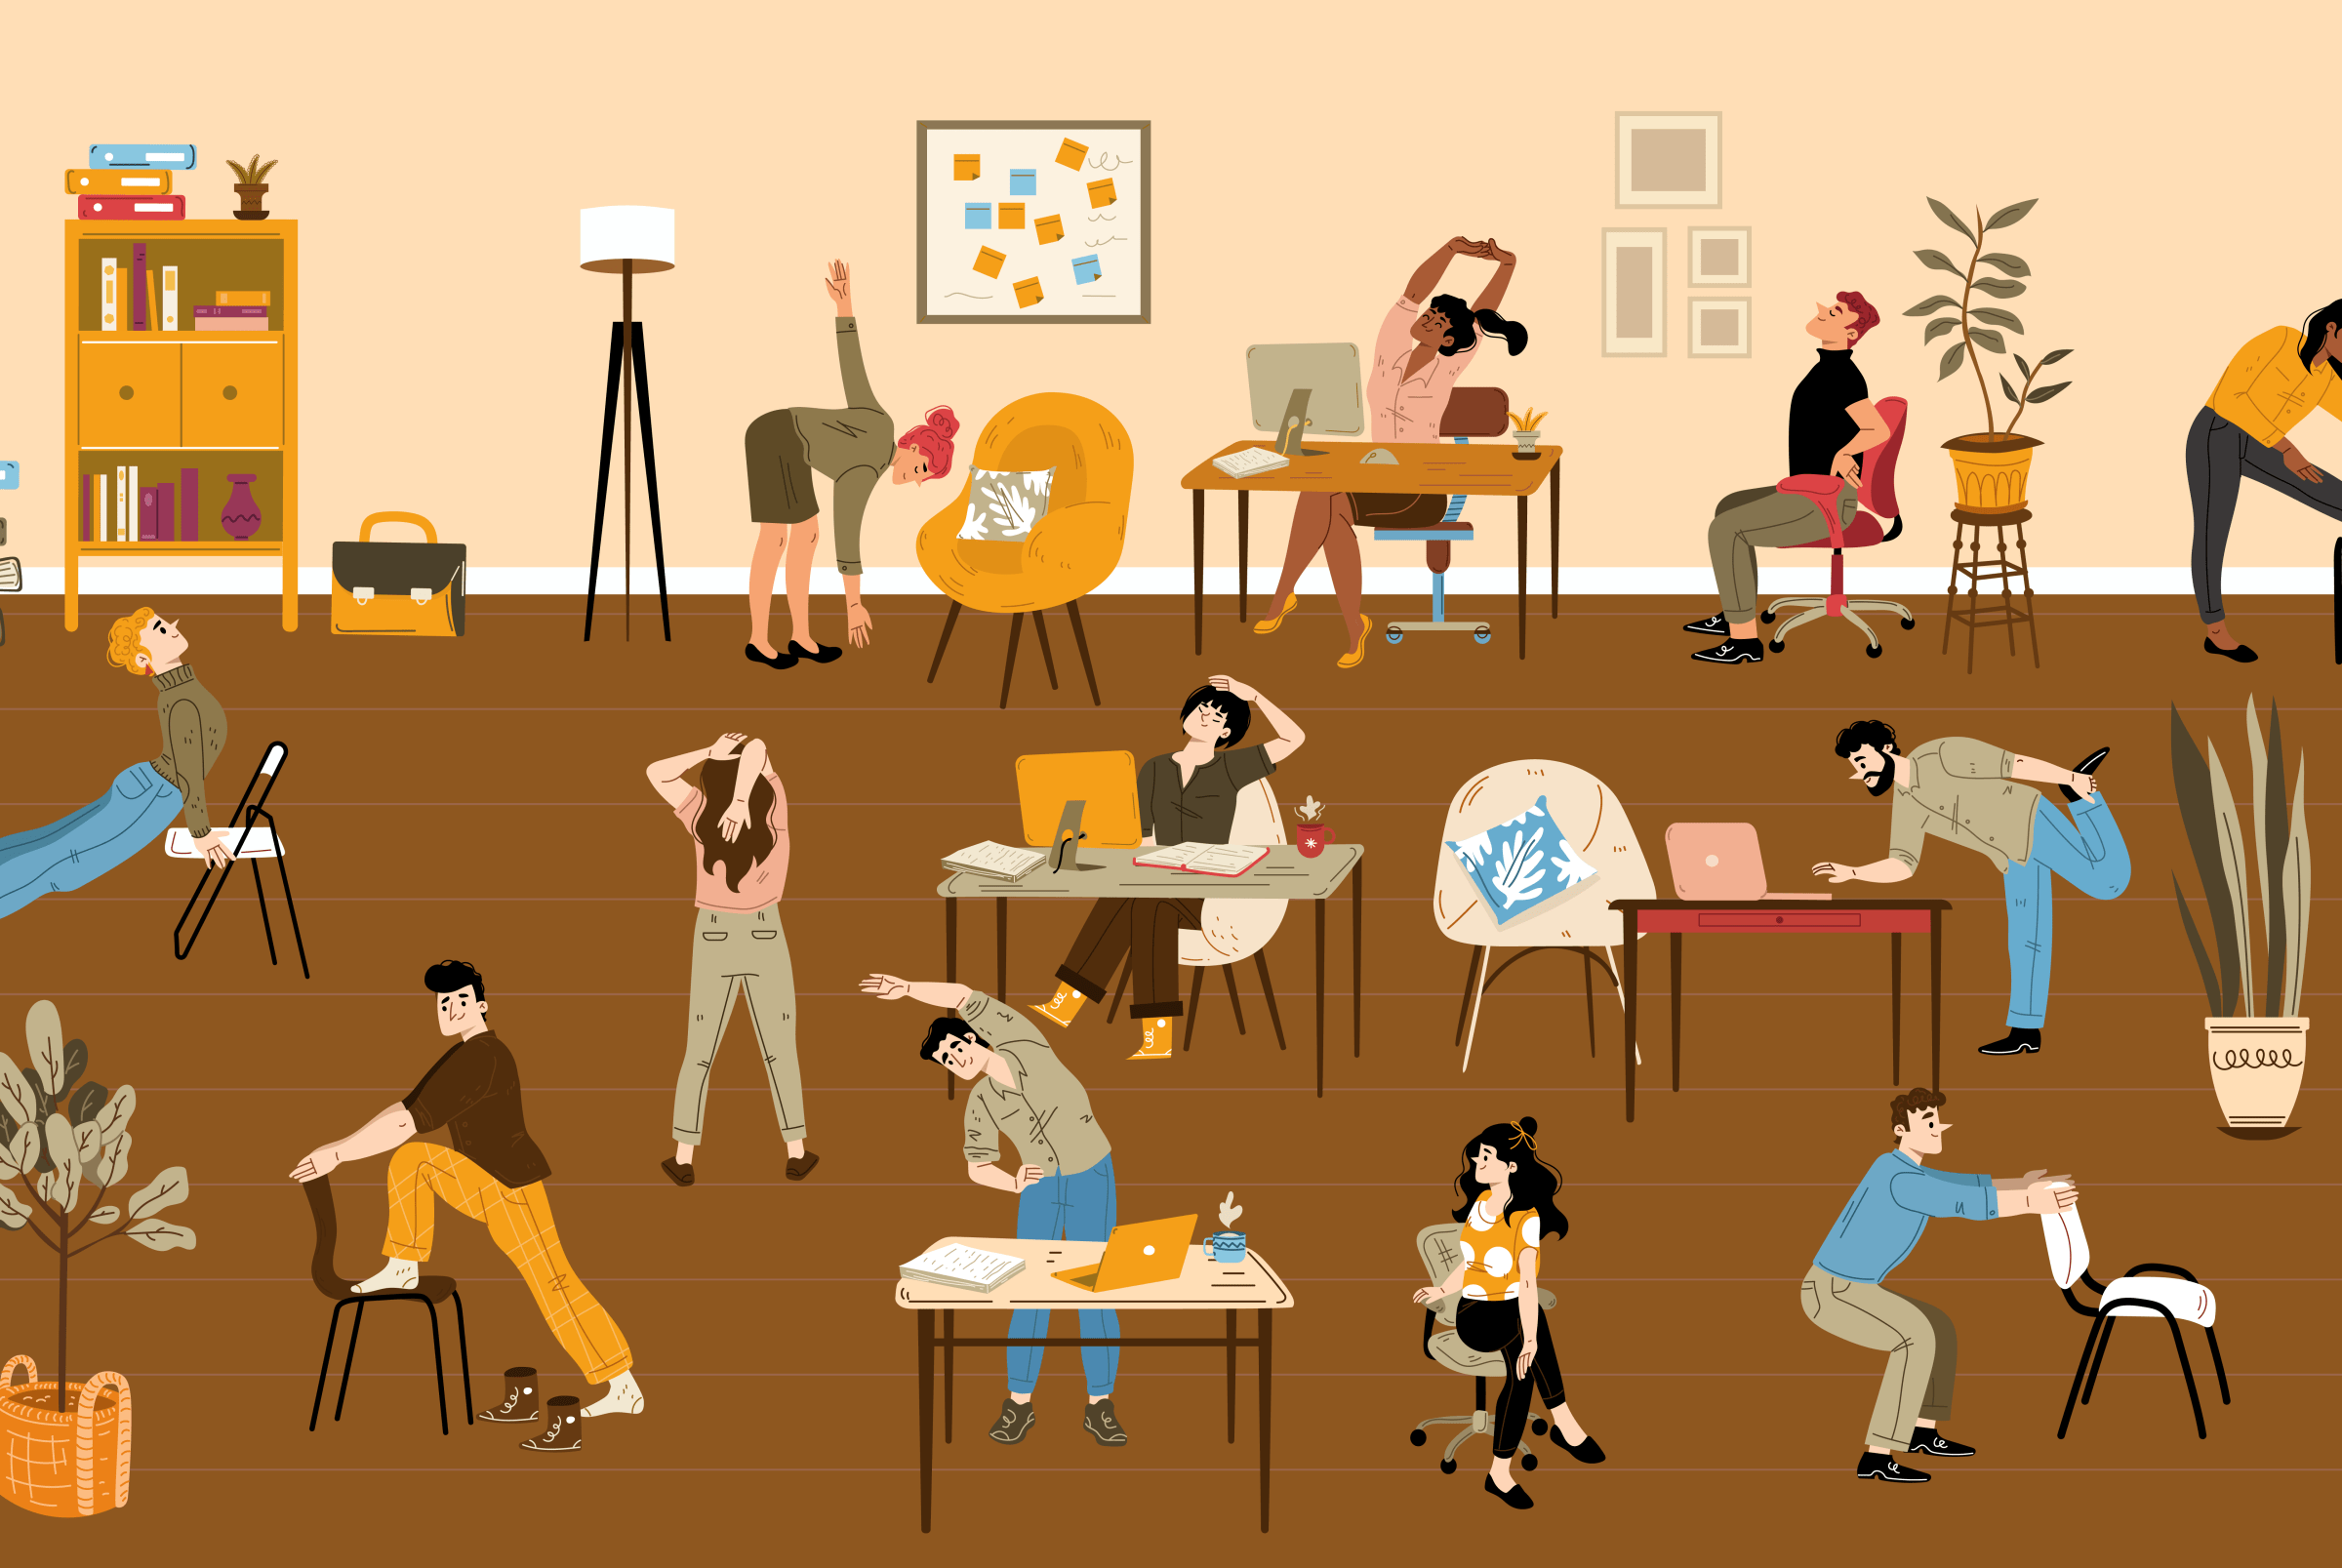 An illustration of an office with workers stretching by their desks and on chairs.